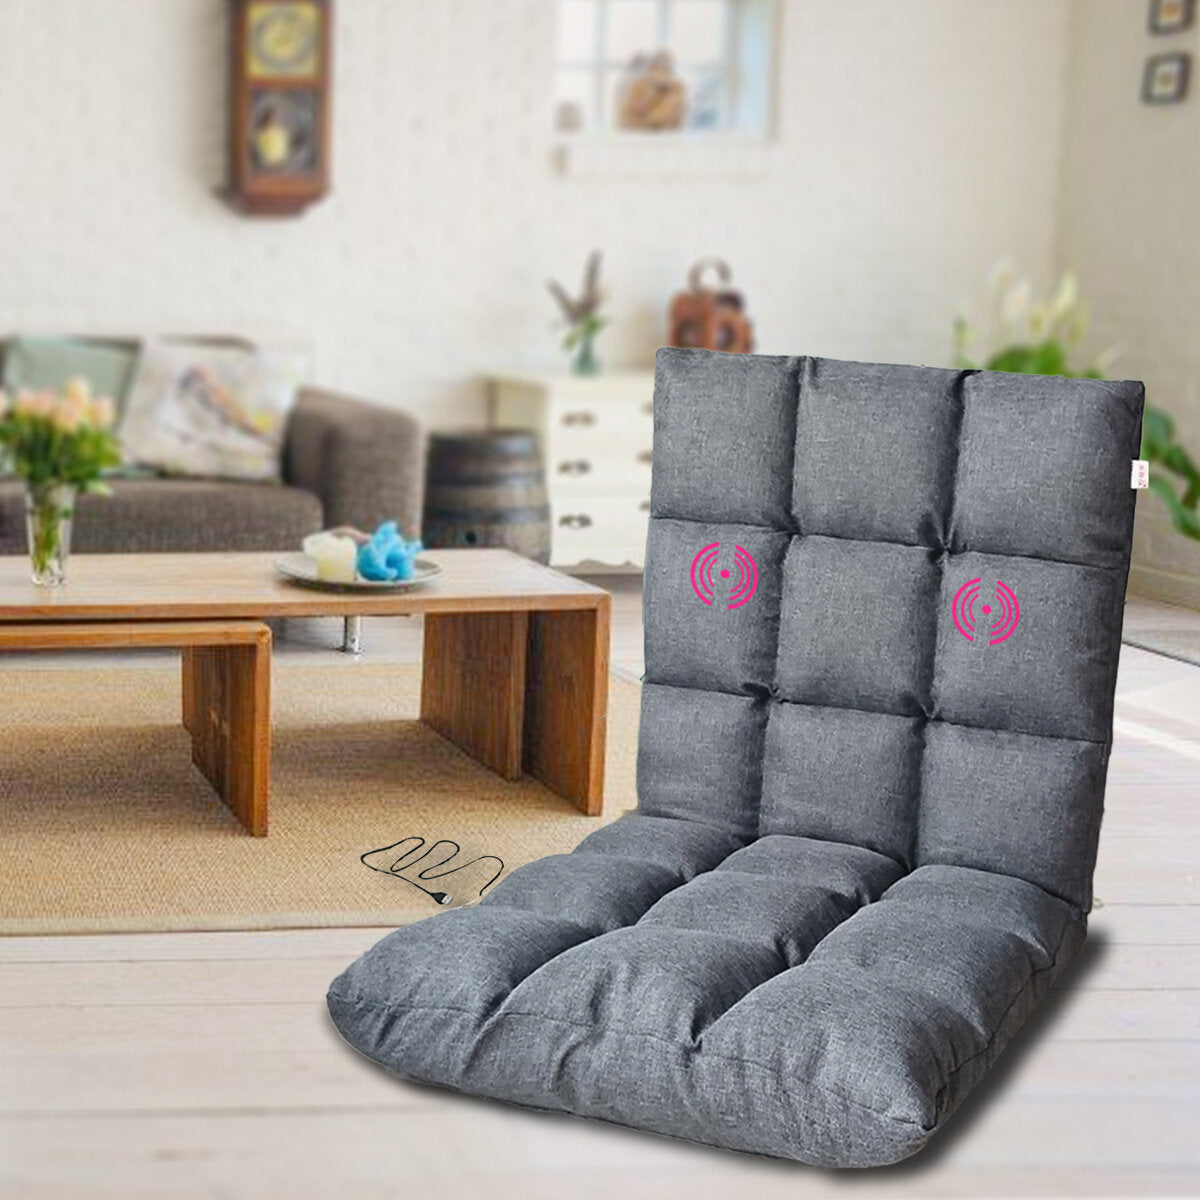 USB Power Supply Folding Floor Chair Adjustable Lazy Sofa Lounger Soft Recliner with Back Support For Home Living Room